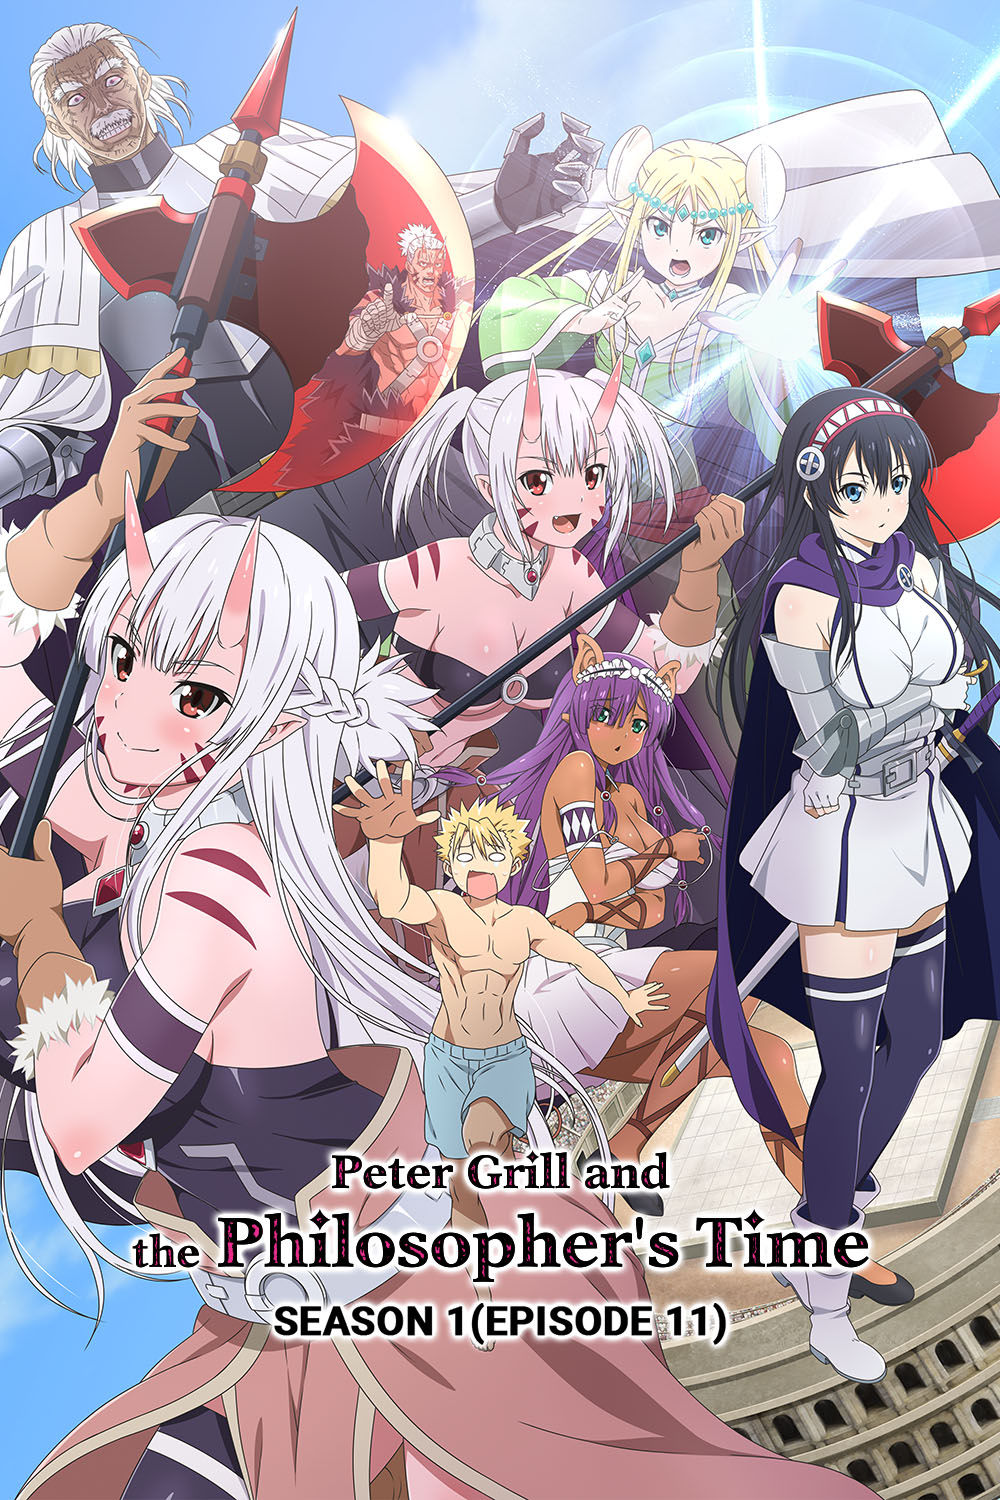 Watch Peter Grill and the Philosophers Time Super Season (S1) EP11 Online